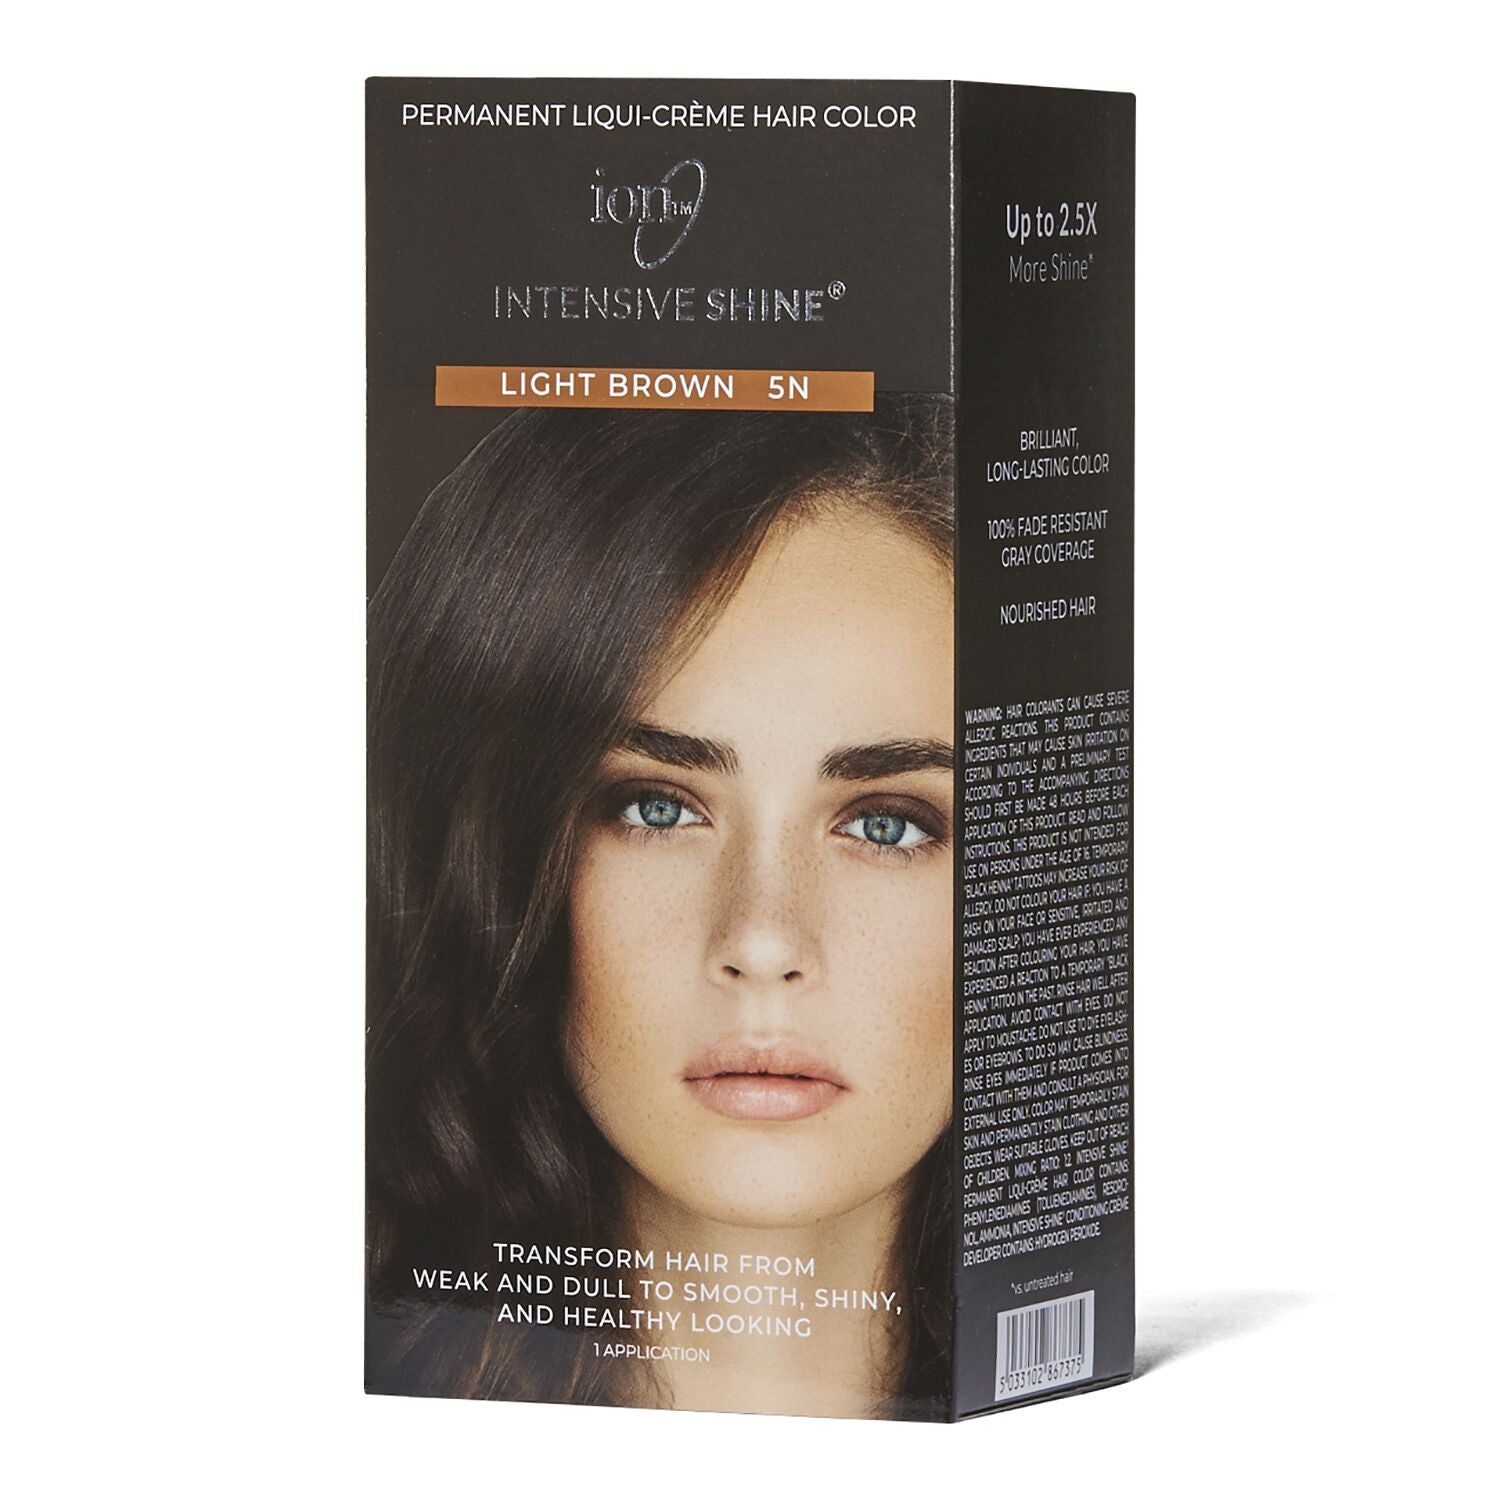 Intensive Shine  by   ion Intensive Shine Hair Color Kit Light Brown 5N